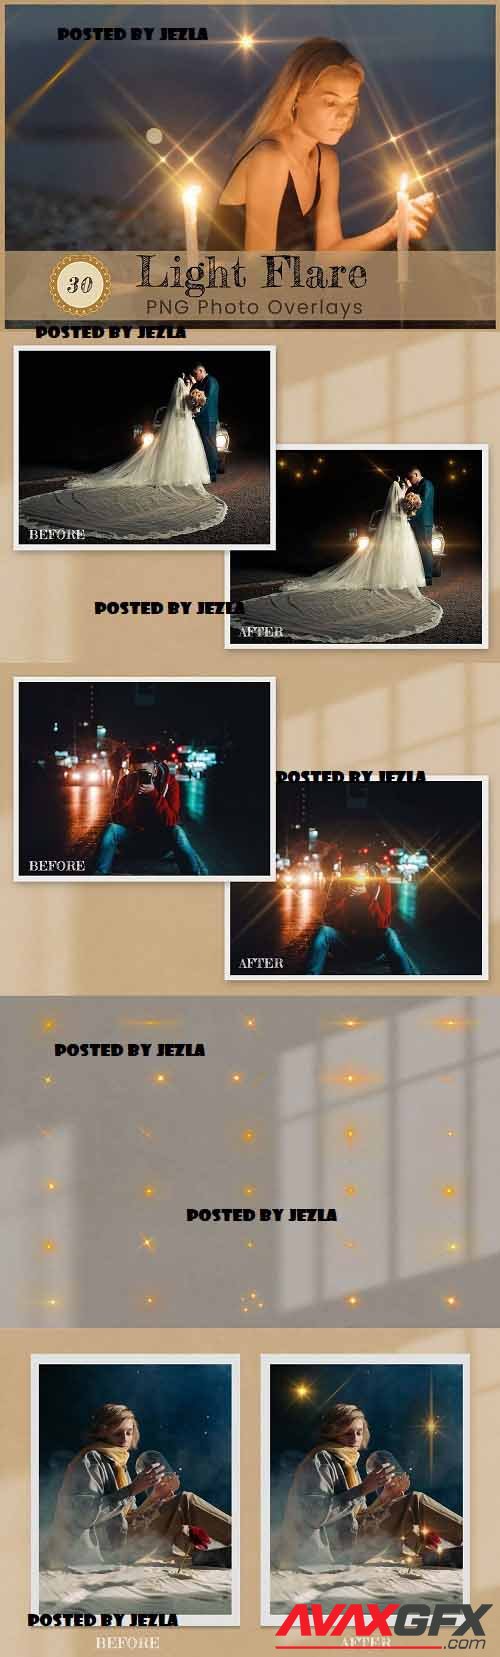 Light Flare Overlay PNG Photography - 7119925